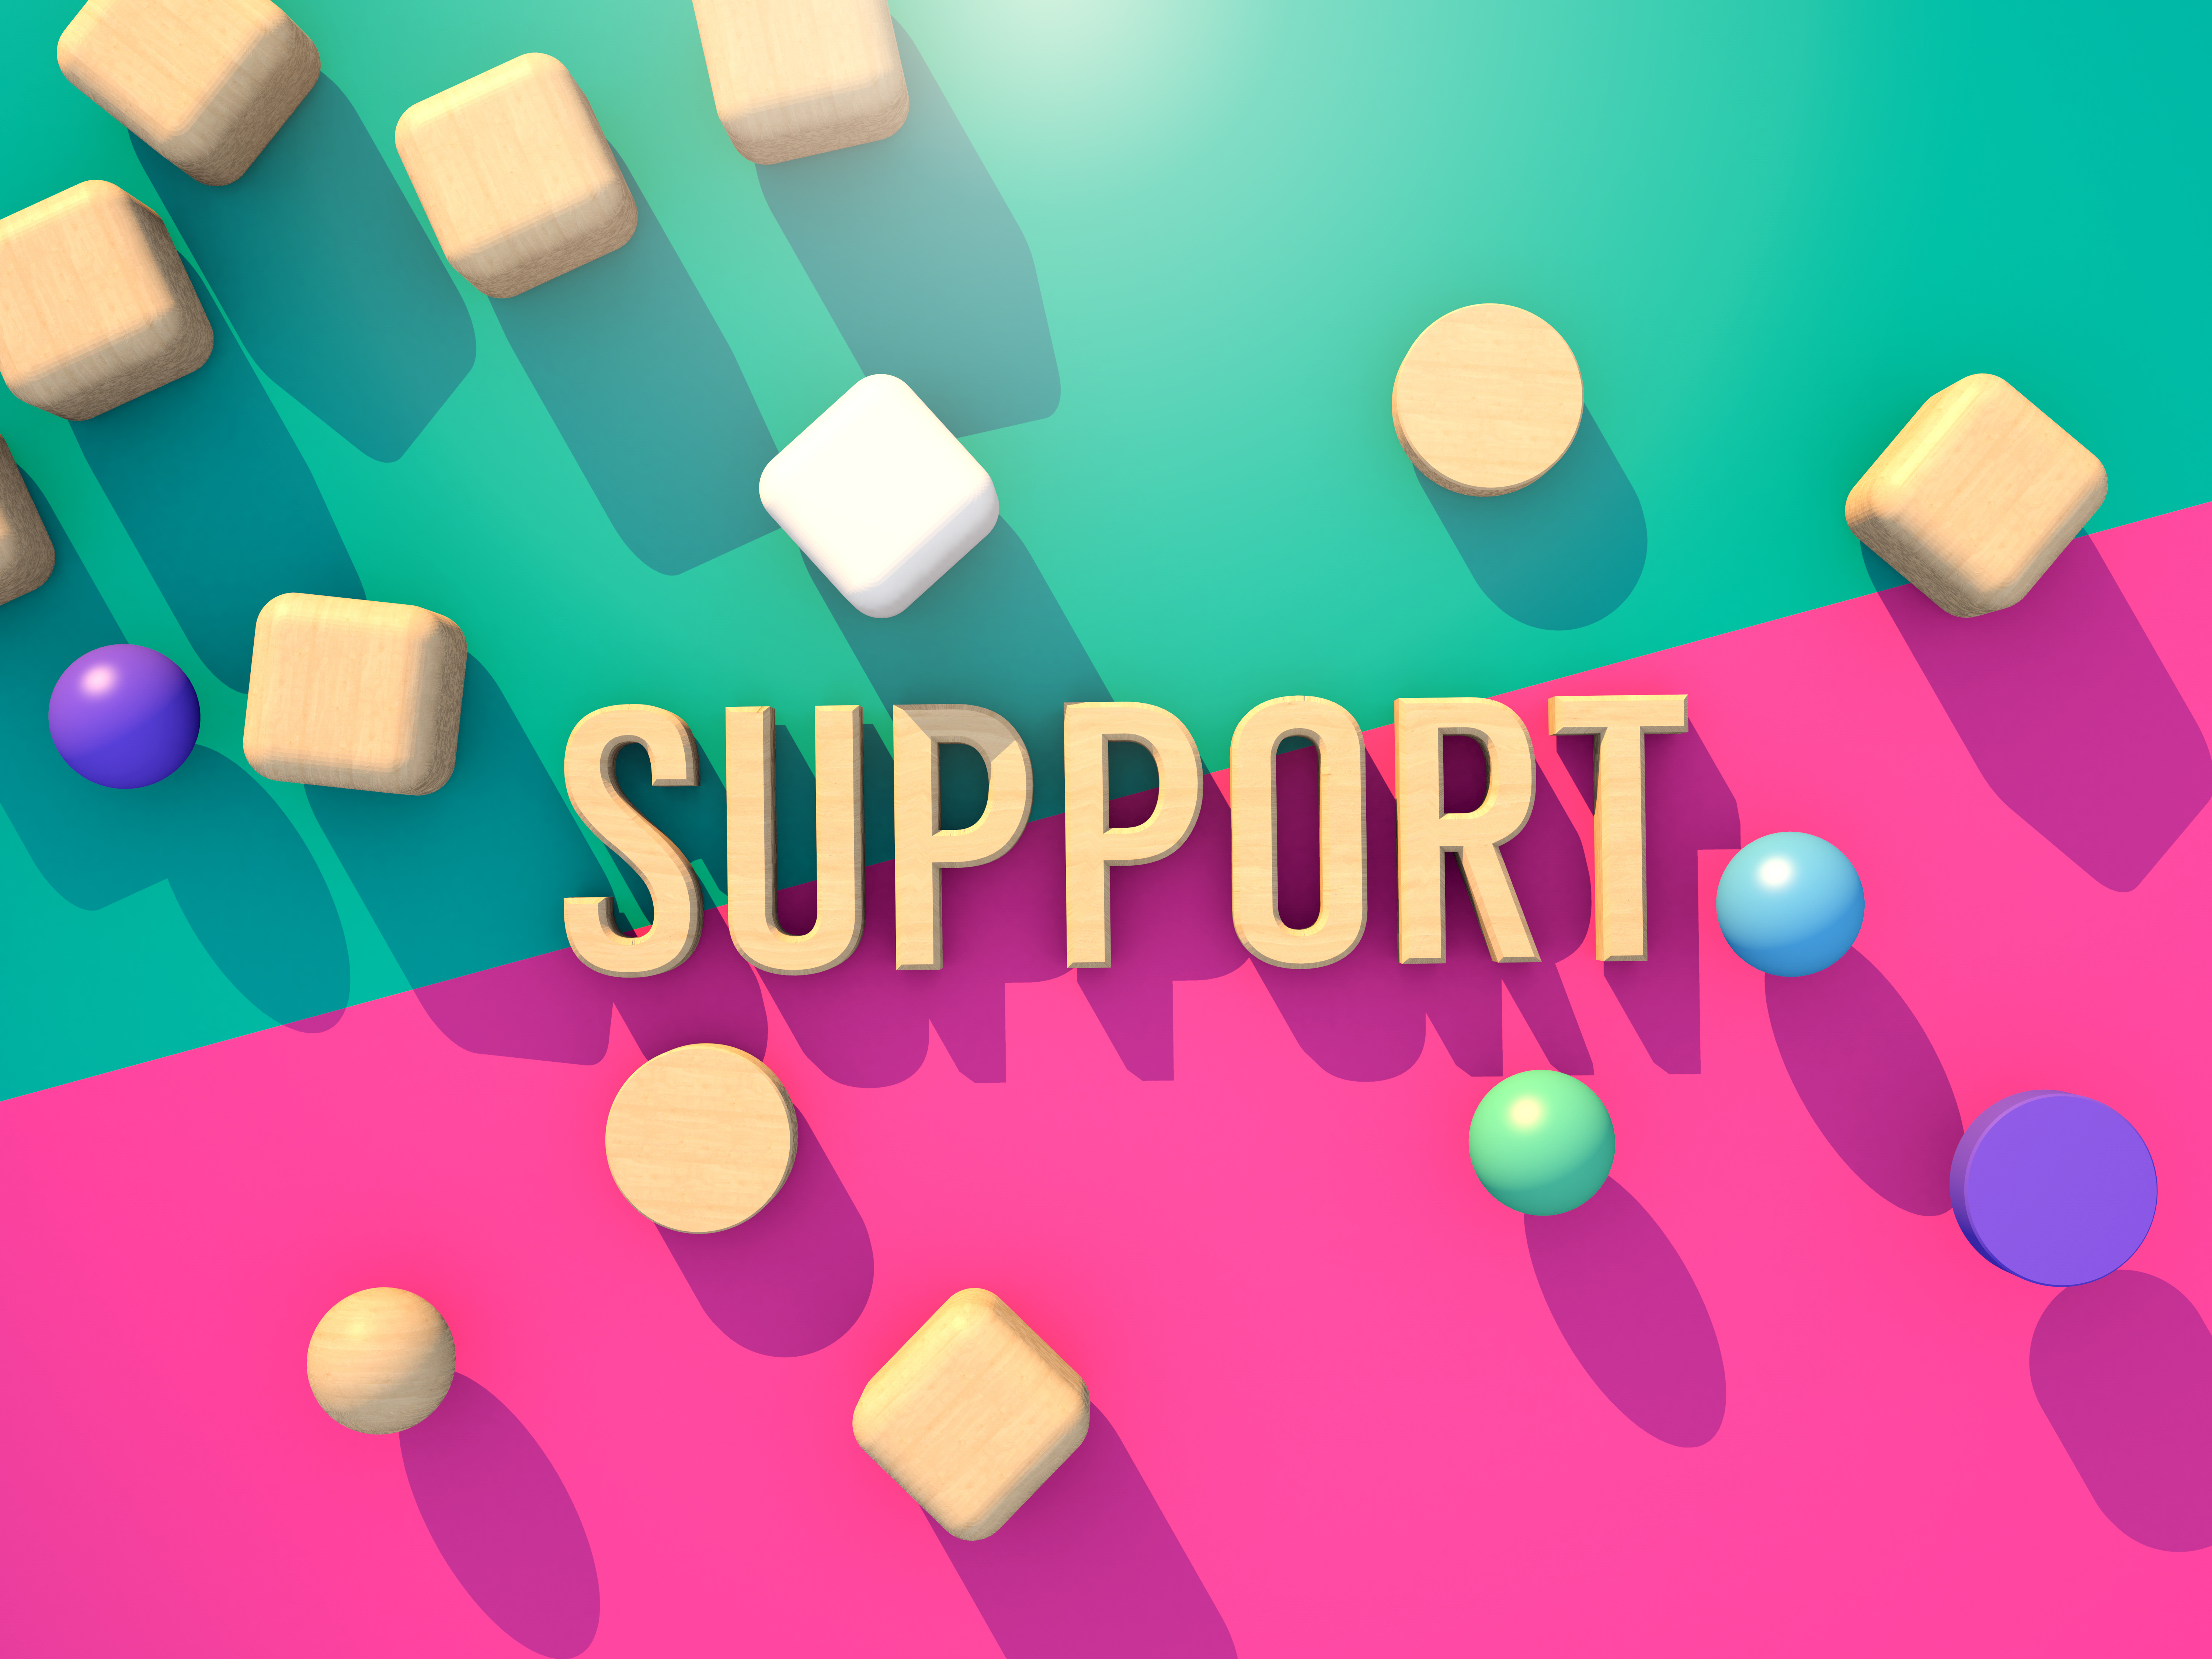 Support image